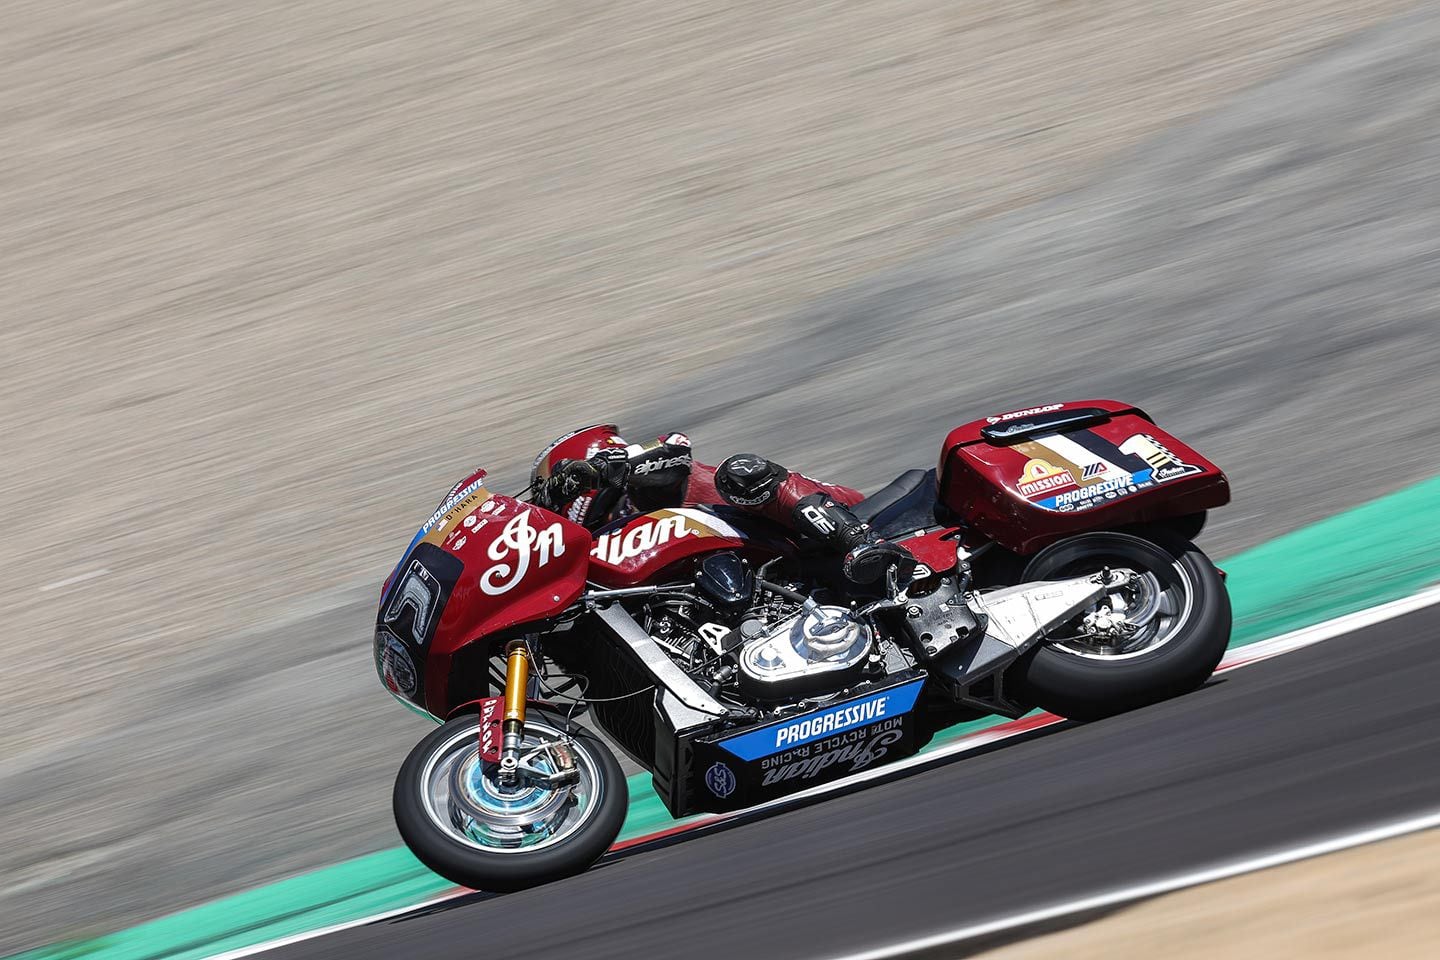 Indian Motorcycle’s race Challenger may be long and heavy, but anyone who has witnessed MotoAmerica’s King of the Baggers racing knows they are anything but slow and boring.